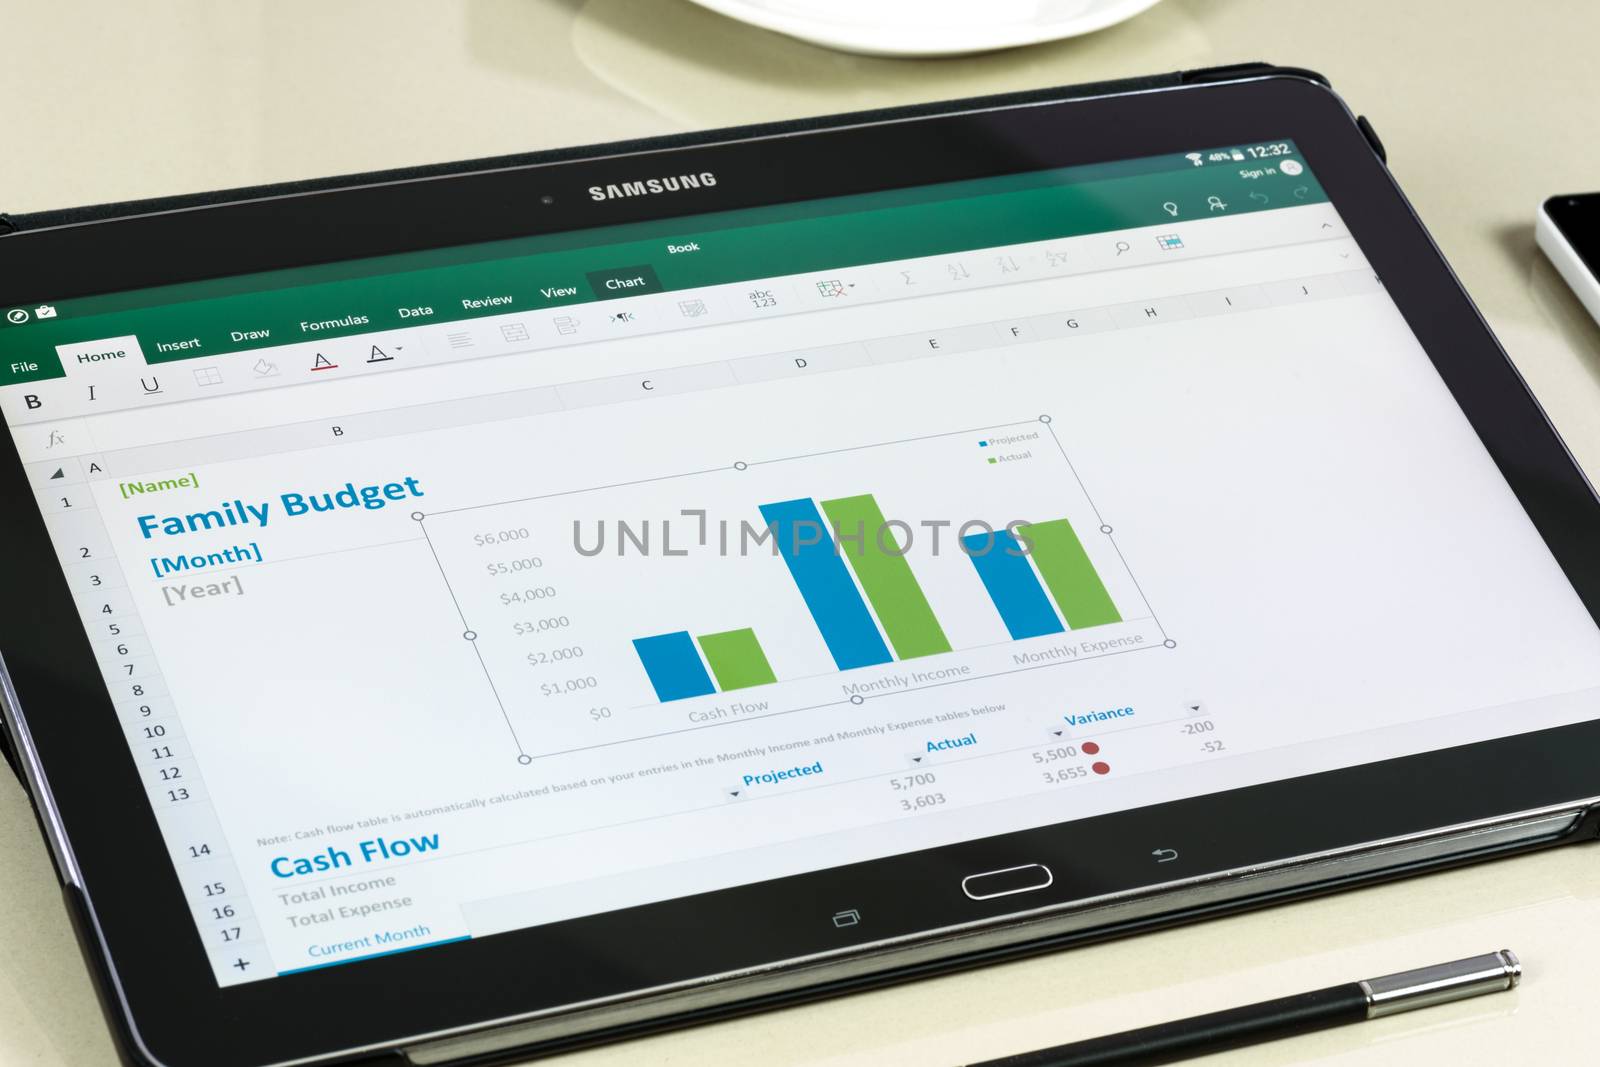 Krynica, Poland - December 19, 2016 - Microsoft Office Excel application on Samsung Galaxy Note Pro 12.2. Microsoft Excel is a spreadsheet developed by Microsoft Corporation for Windows, macOS, Android and iOS. 